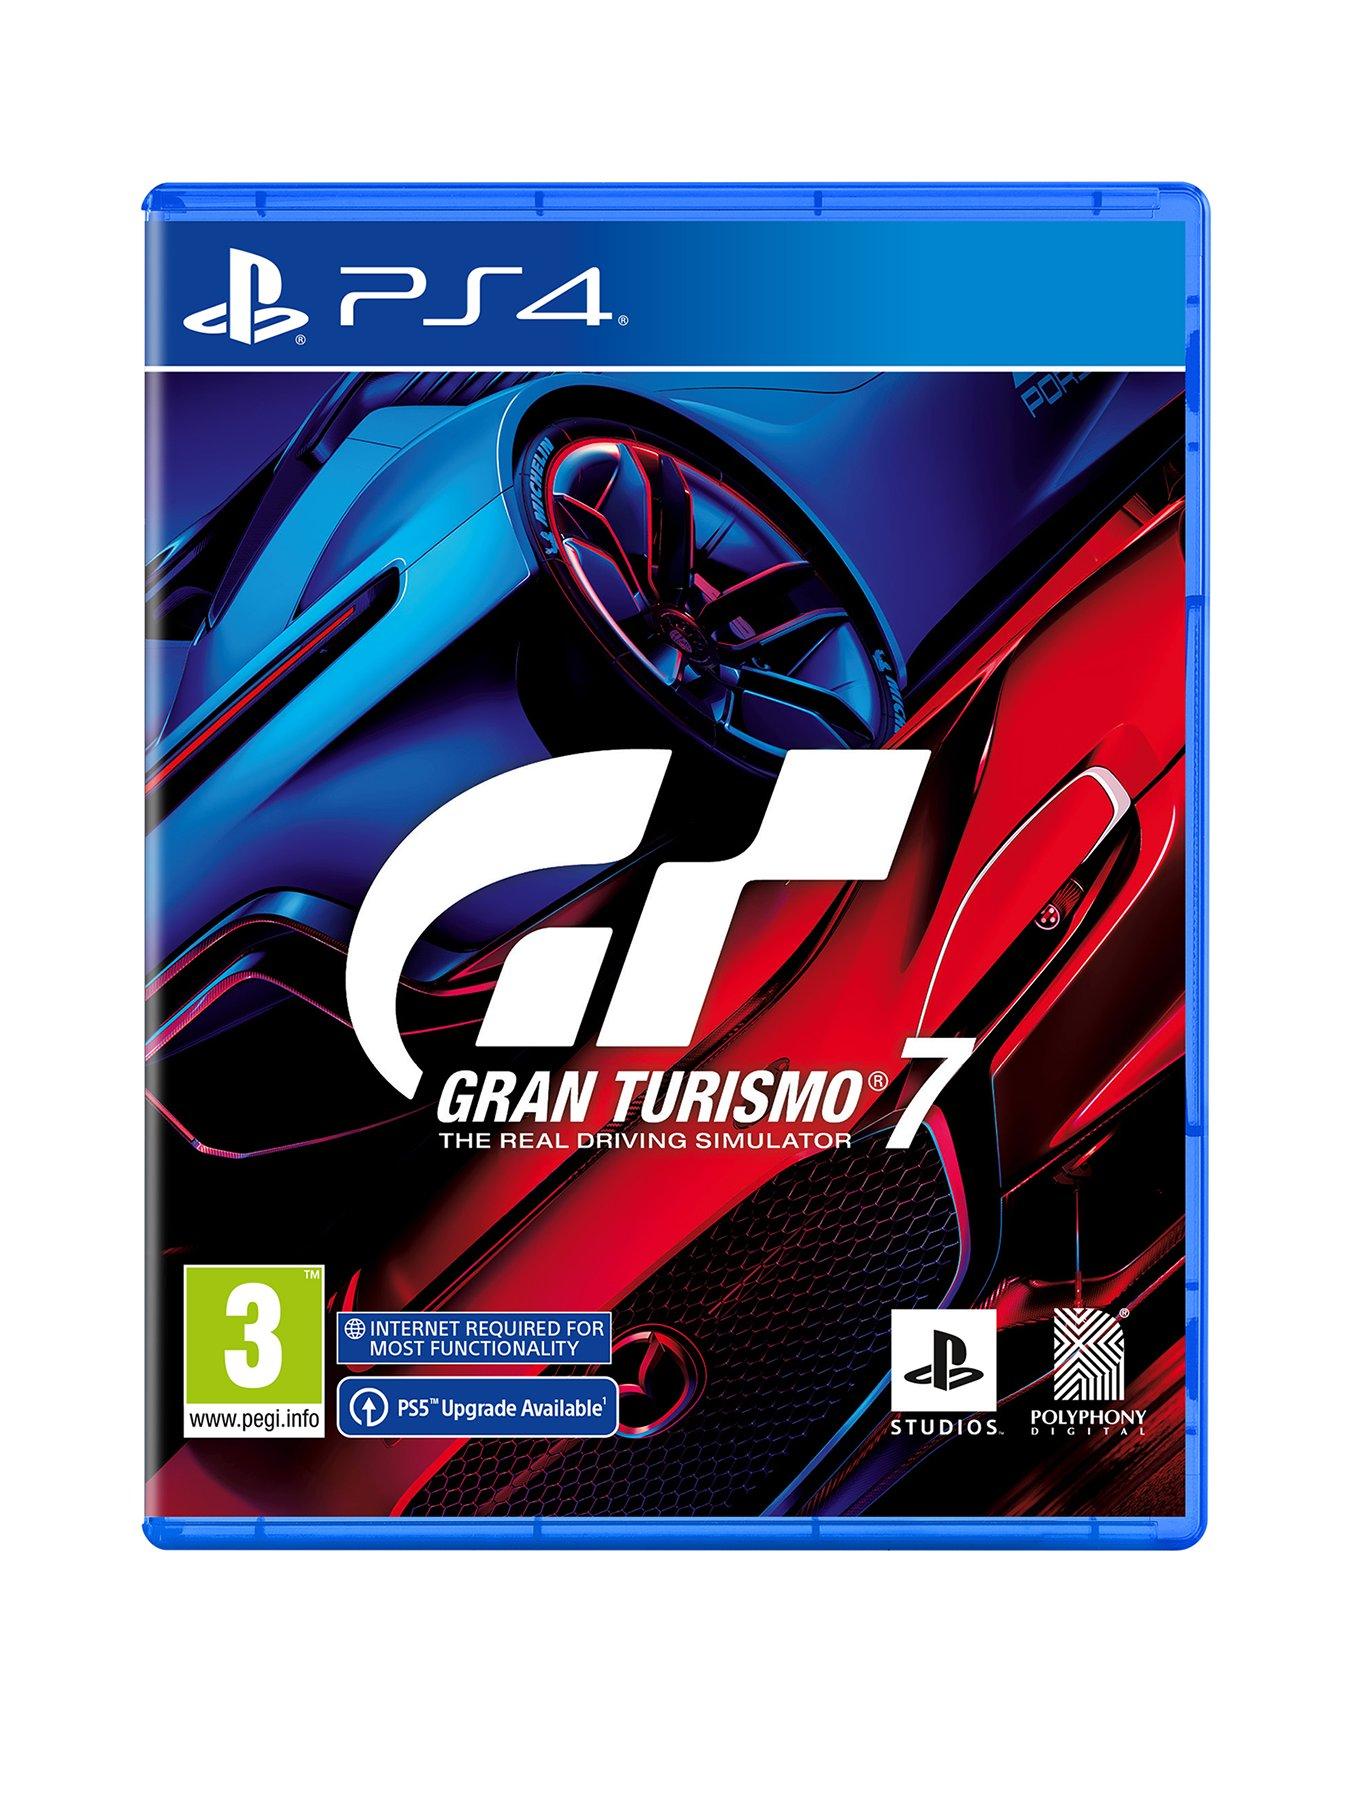 PS5 Gran Turismo 7 Metallic Covers (The Best Decals on )